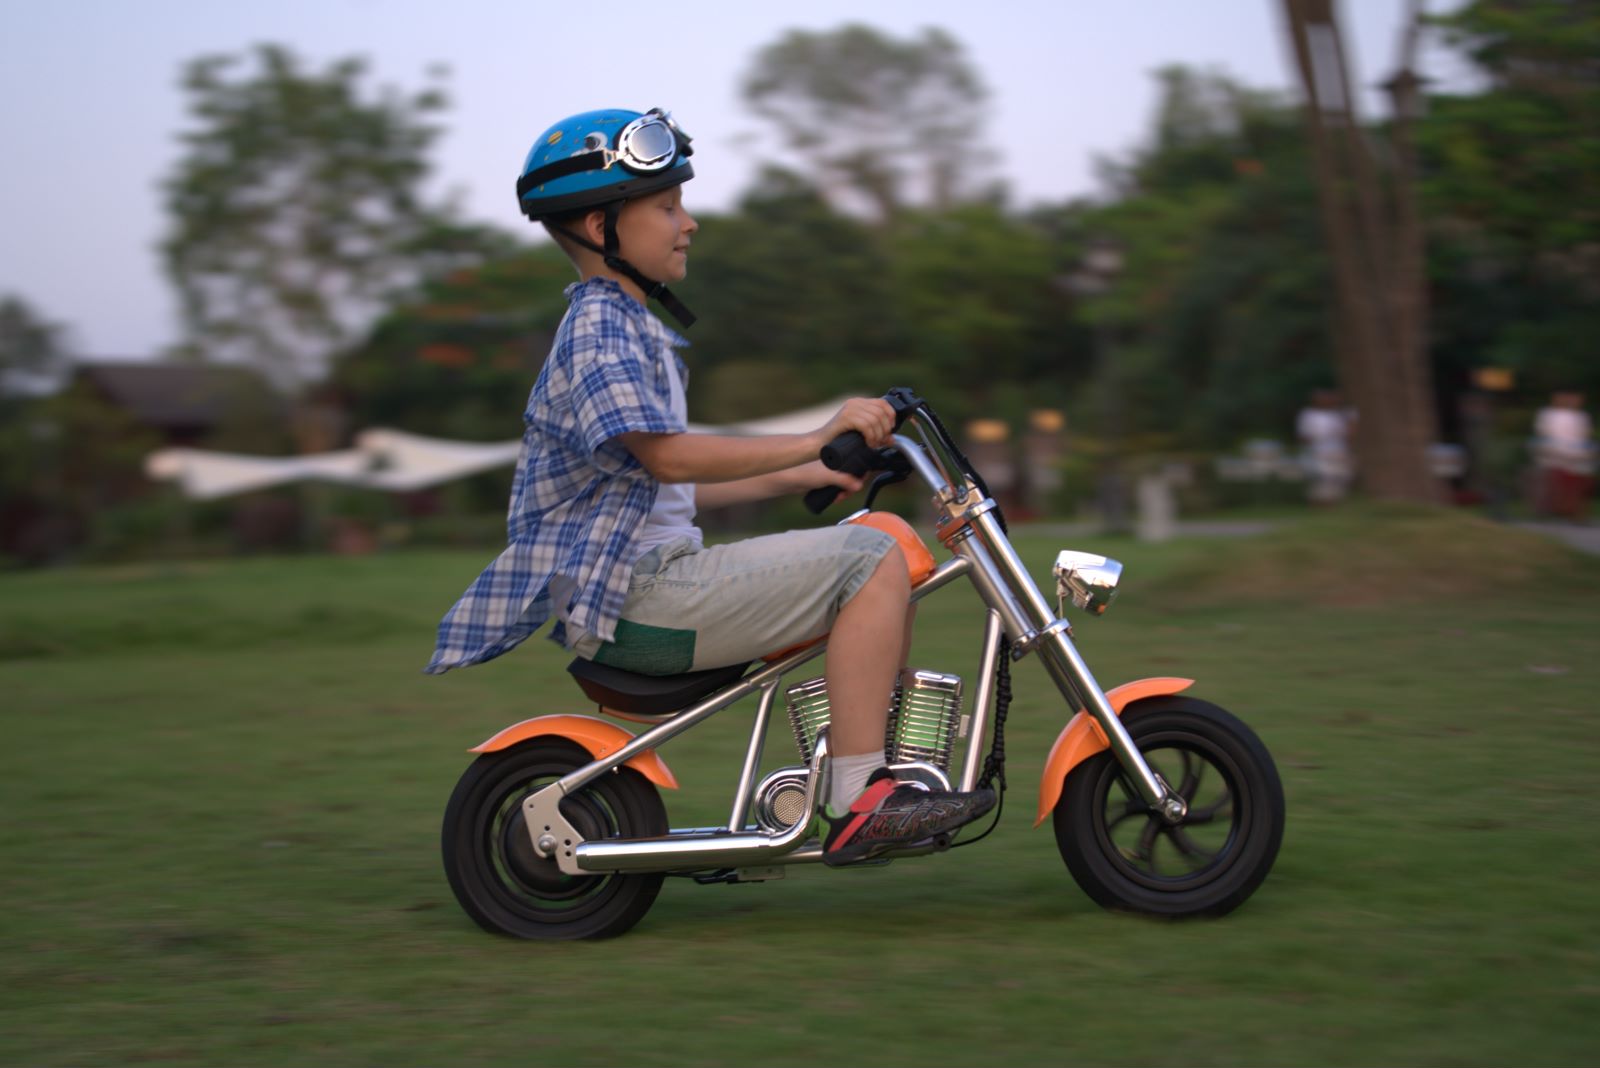 The Best Gift - For Kids Who Love Riding Toys